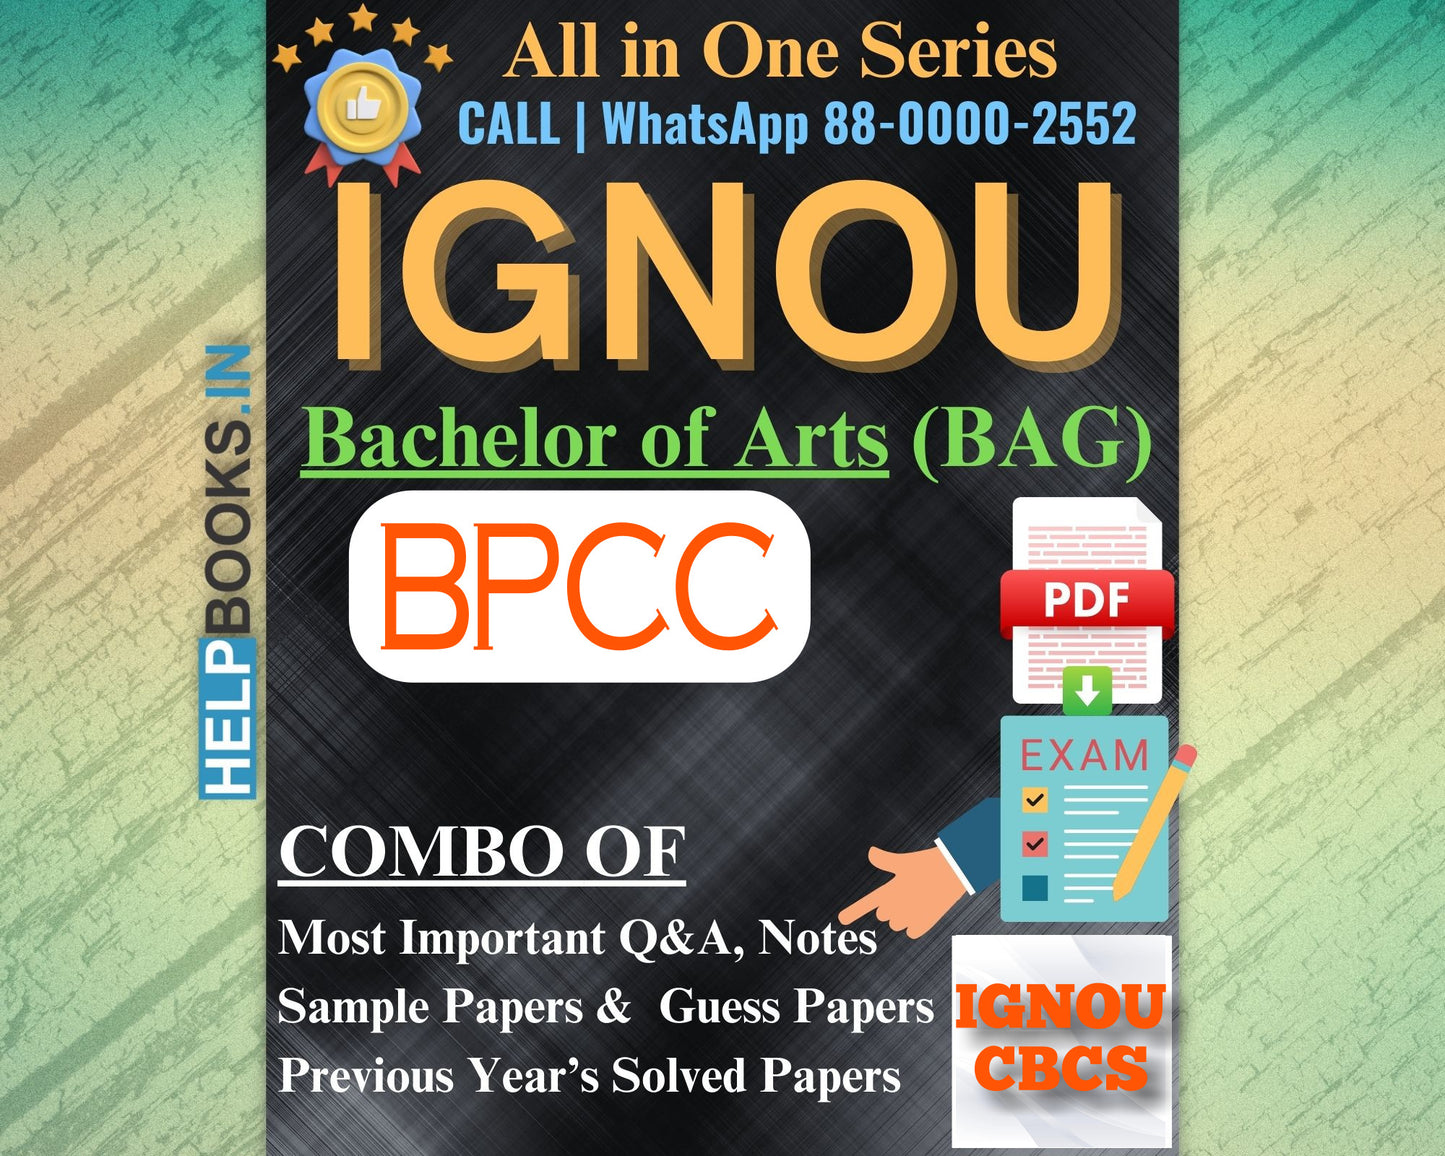 IGNOU BAG Online Study Package: Bachelor of Arts (BA) - Previous Years Solved Papers, Q&A, Exam Notes, Sample Papers, Guess Papers-BPCC131, BPCC132, BPCC133, BPCC134